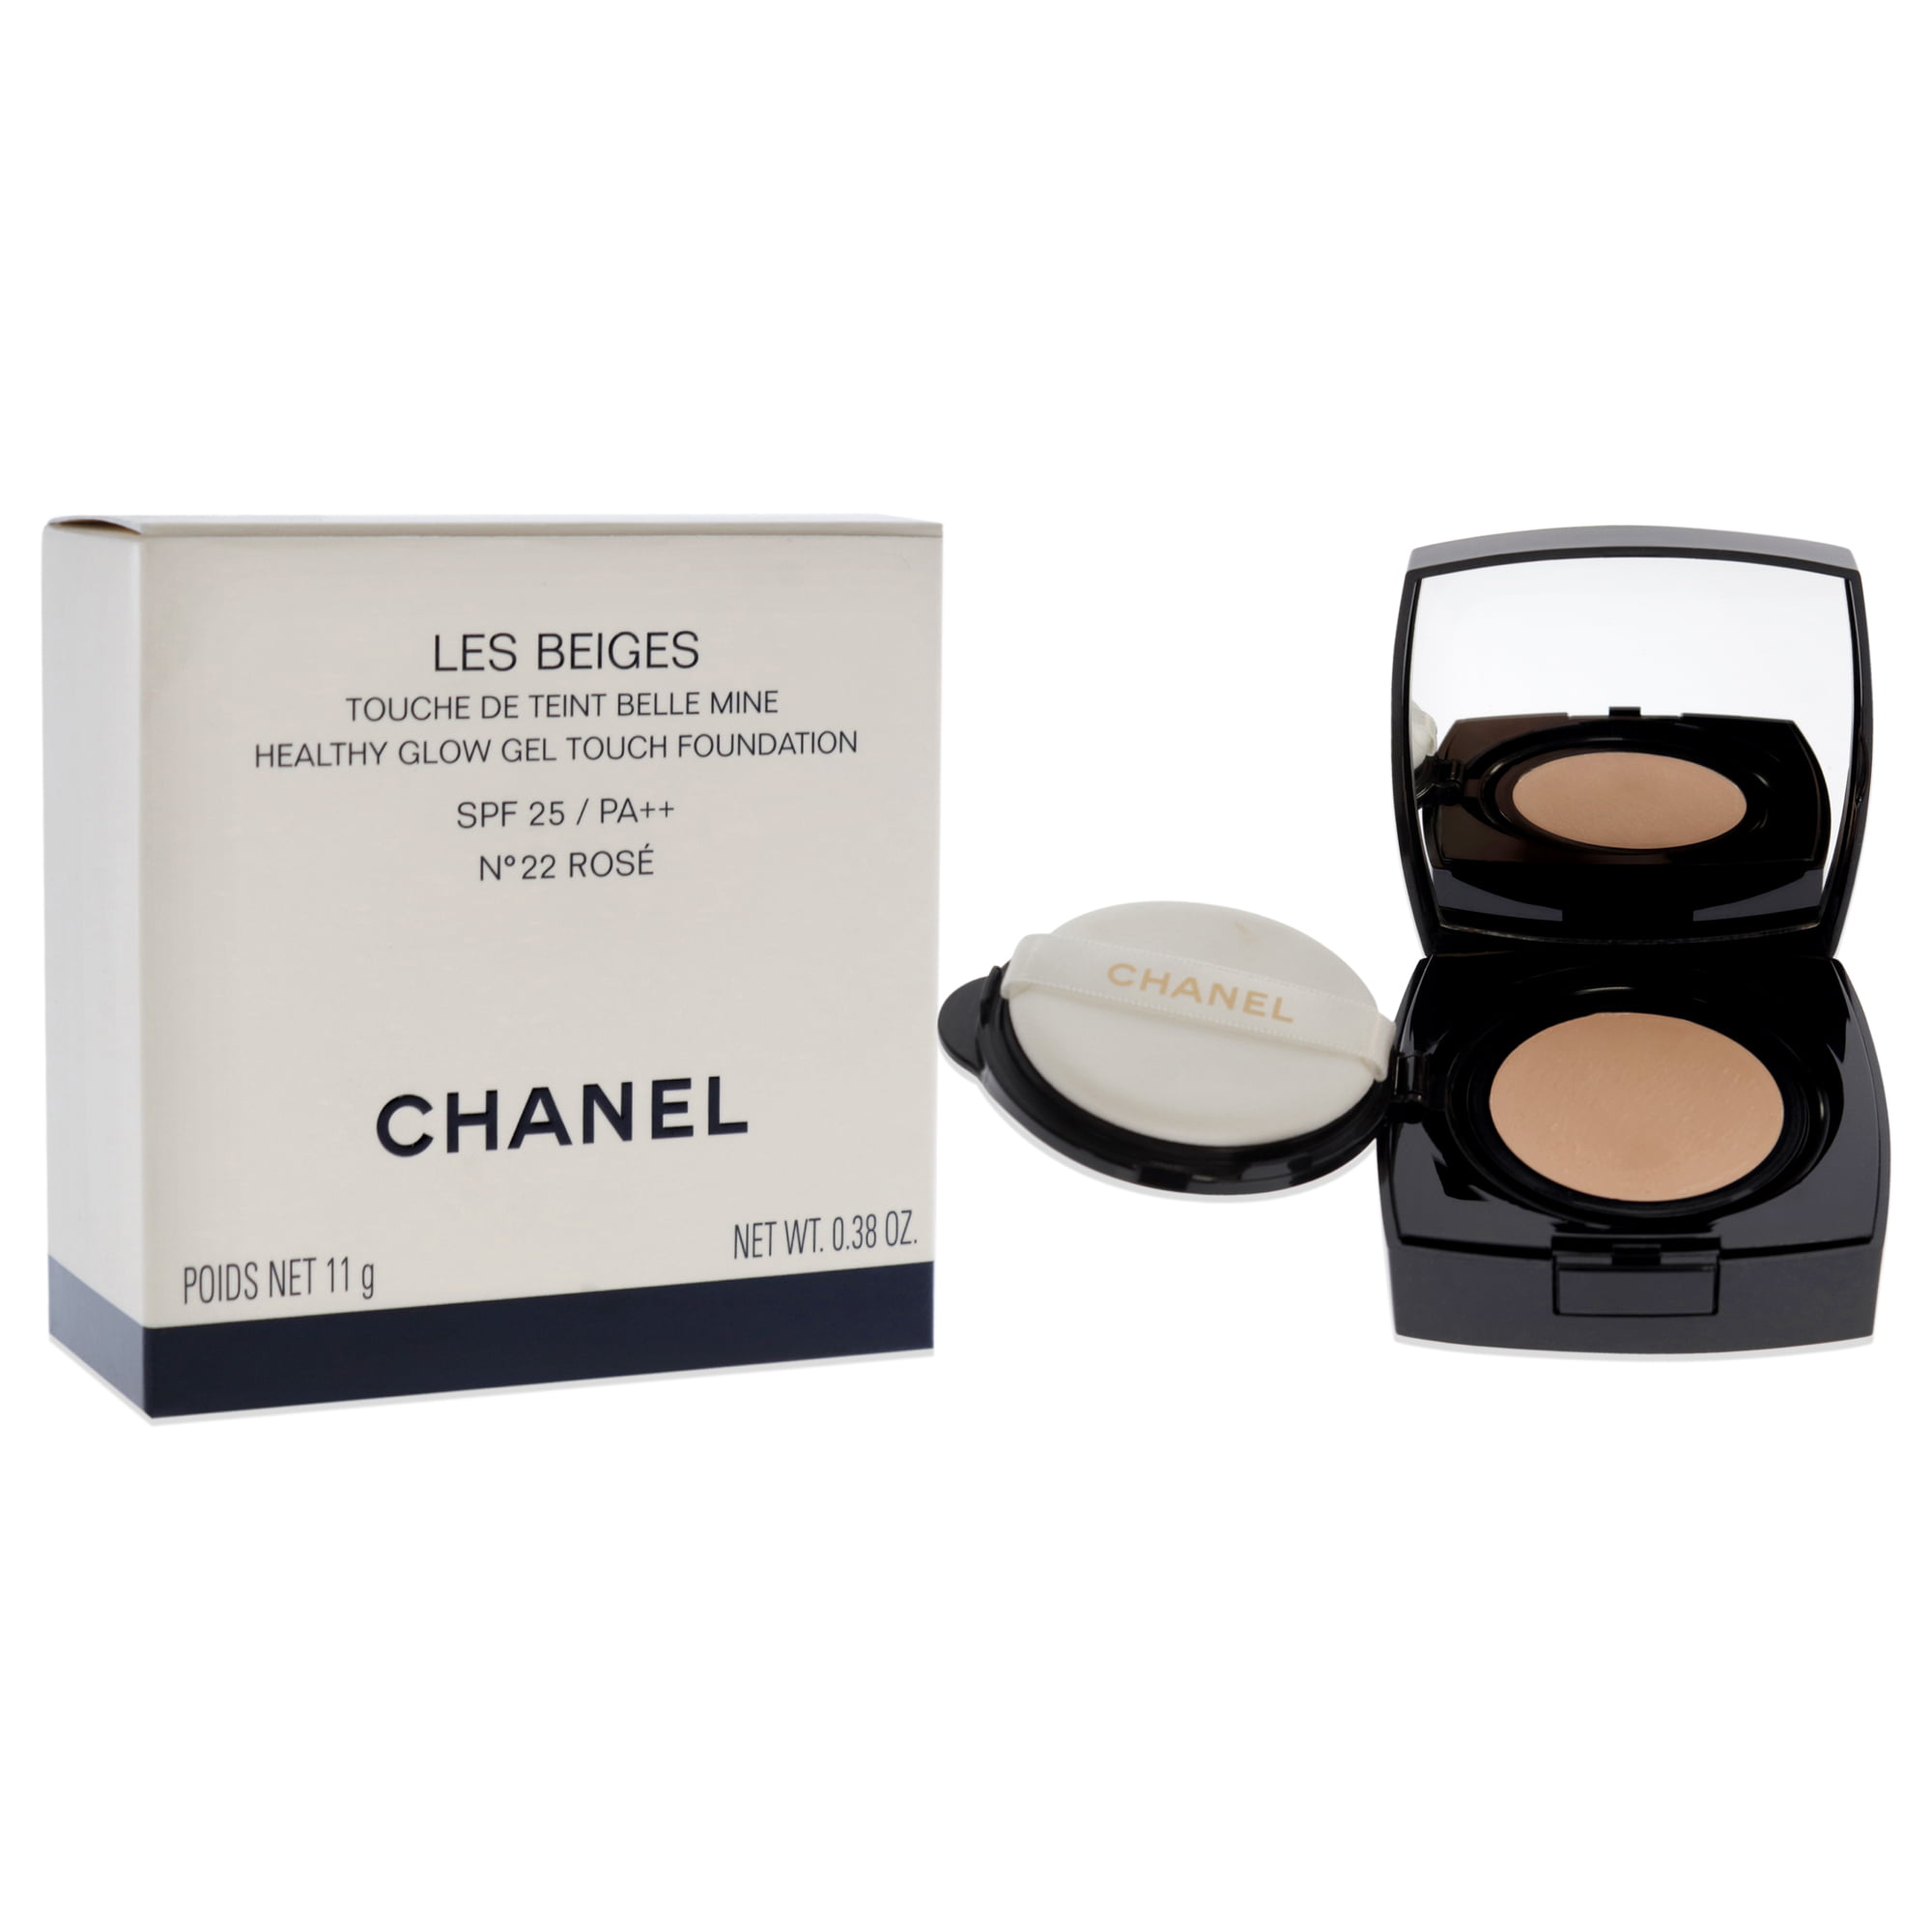 Chanel Les Beiges Cushion Foundation Gel Touch SPF25